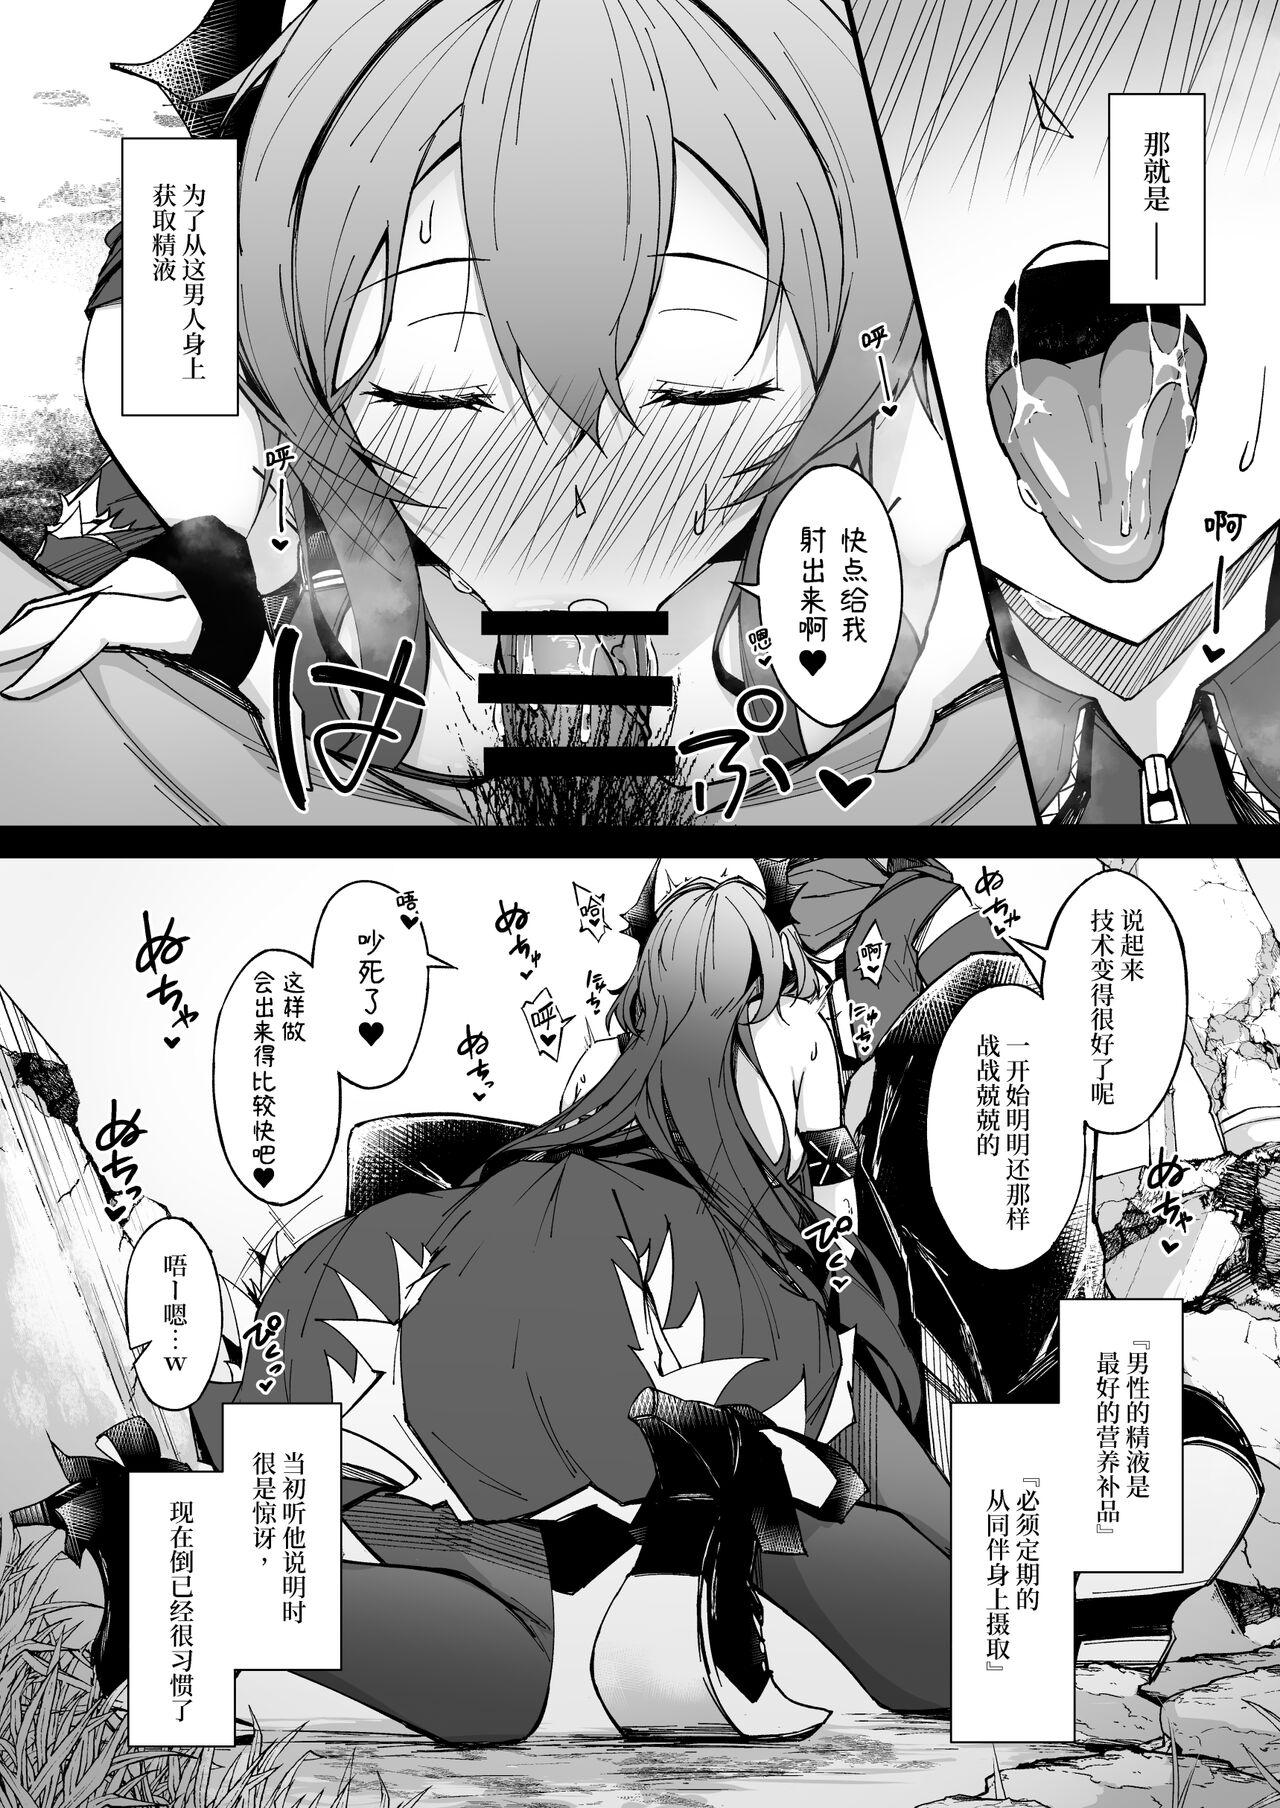 Cut Corruption Memories - Arknights Domina - Page 5